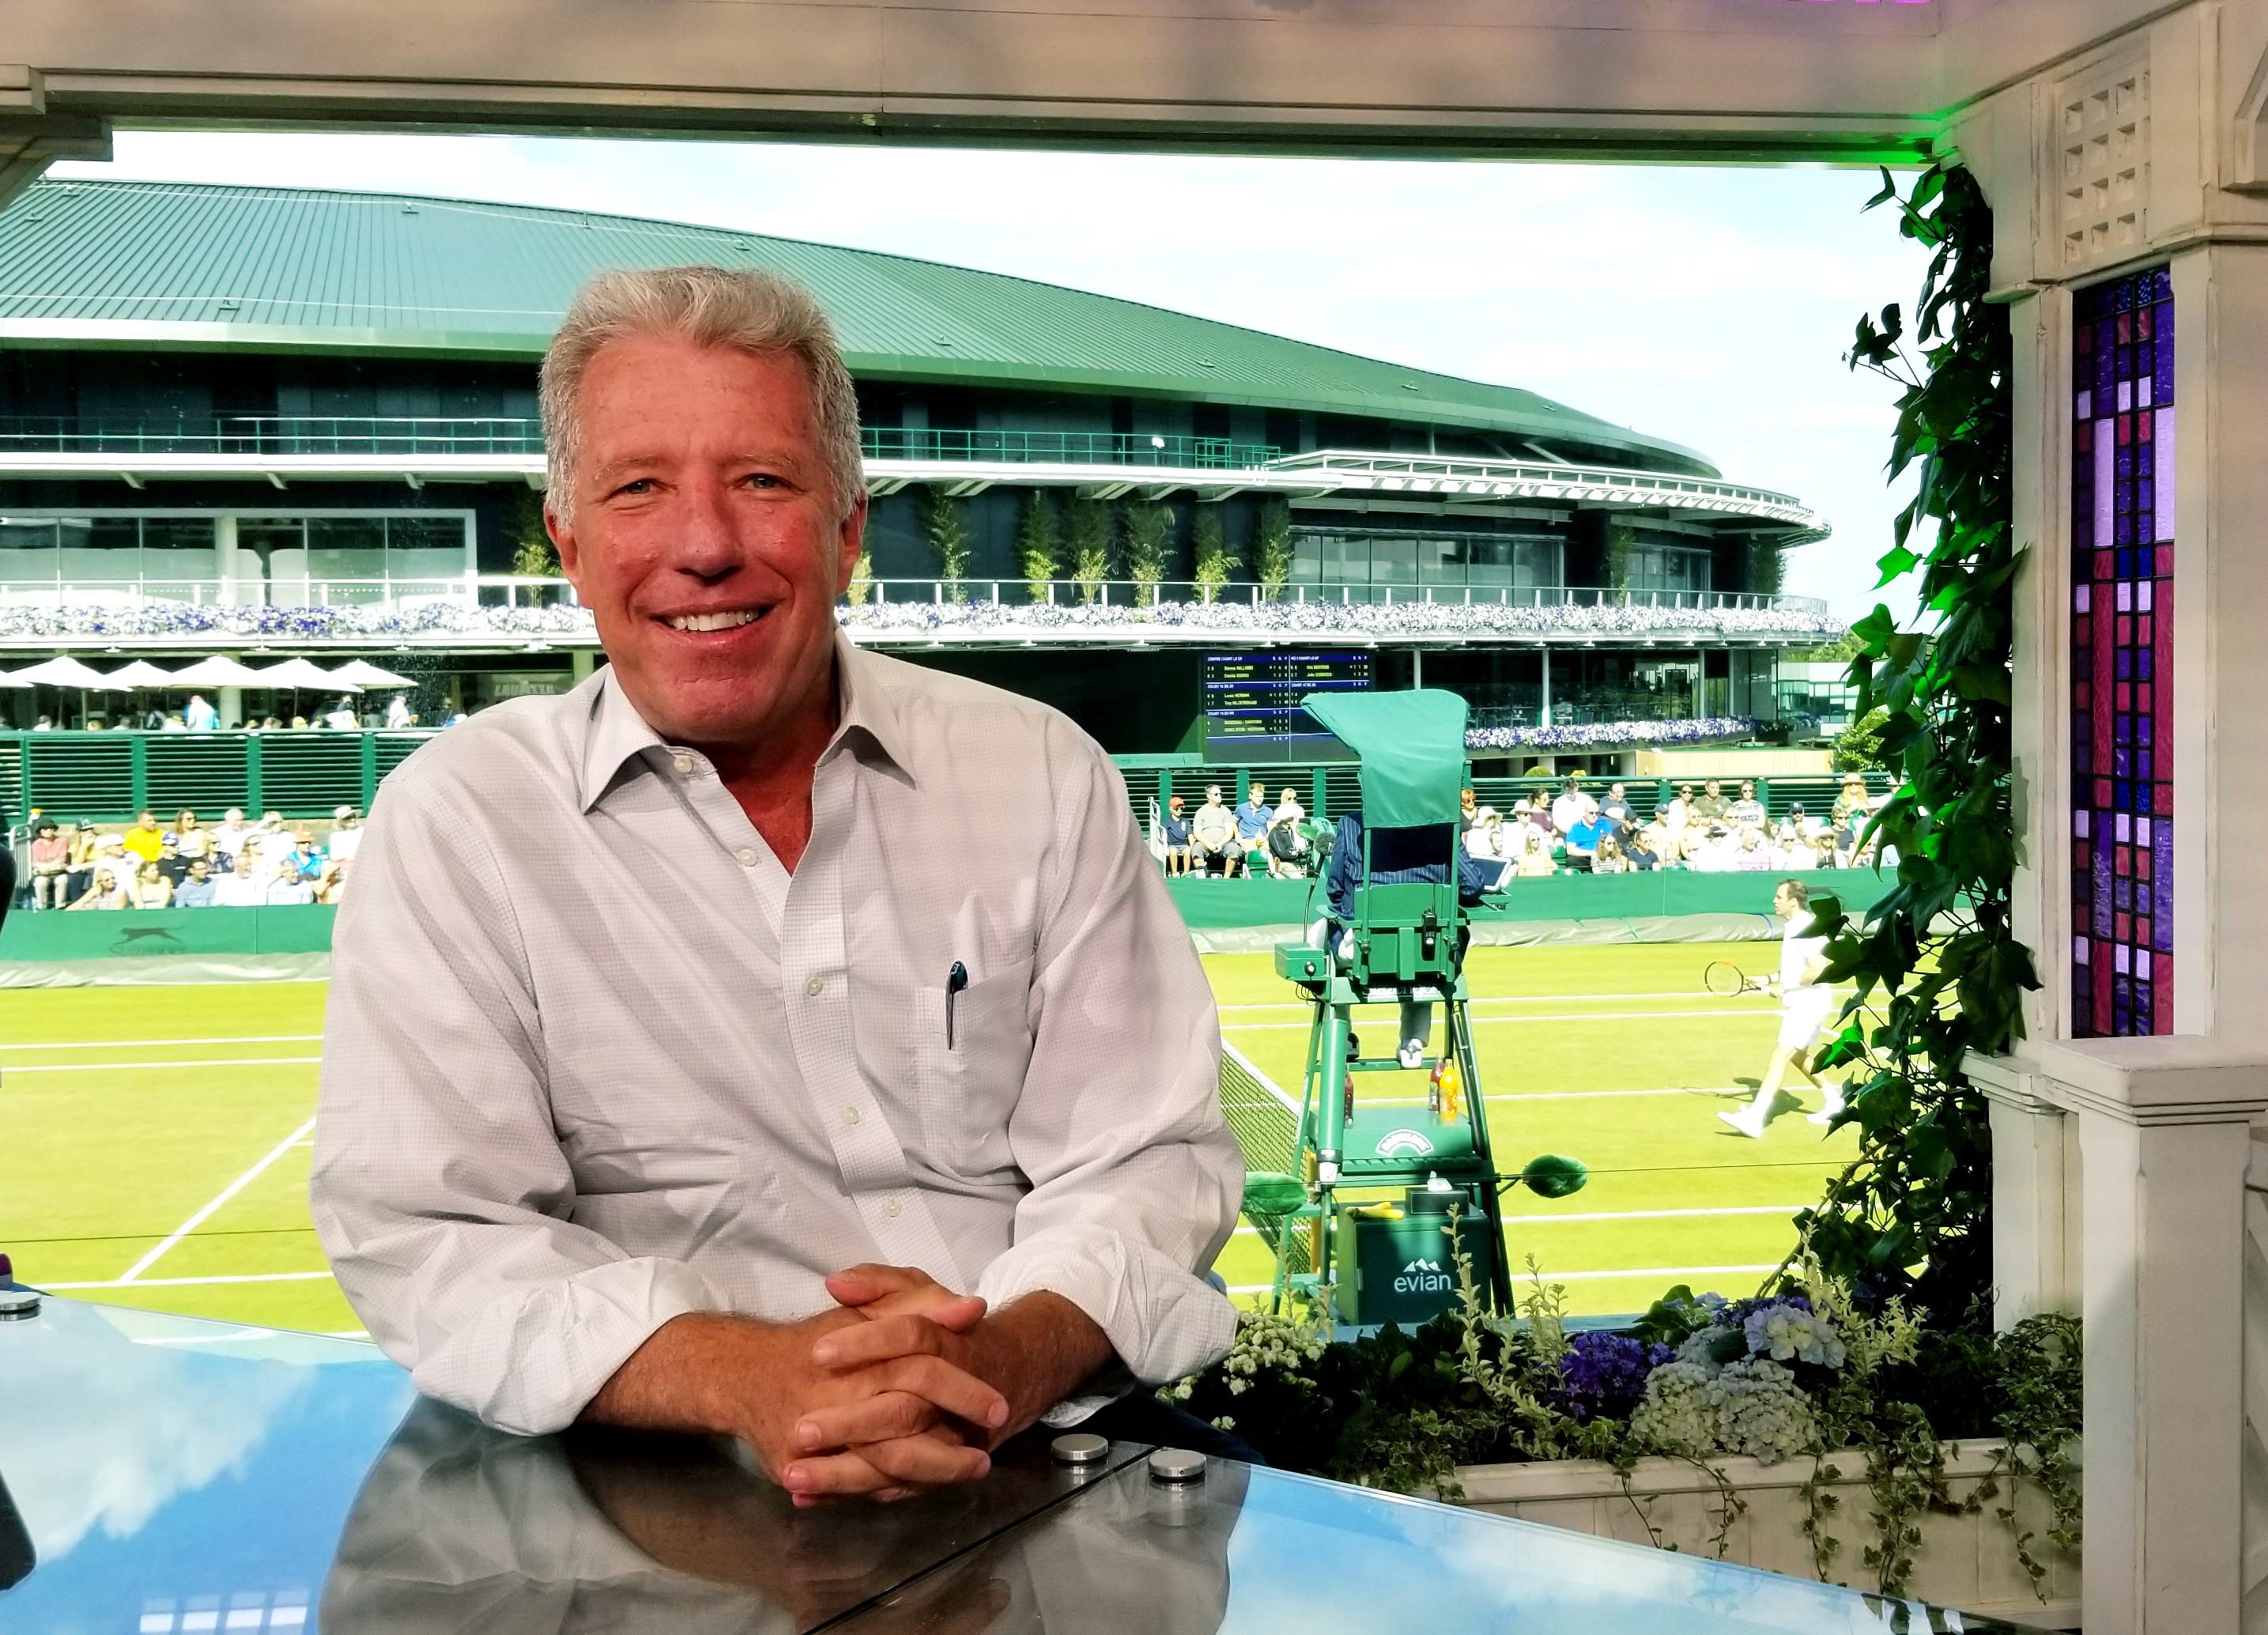 Live From Wimbledon ESPNs Jamie Reynolds on the Challenges in Broadcasting a Grand Slam